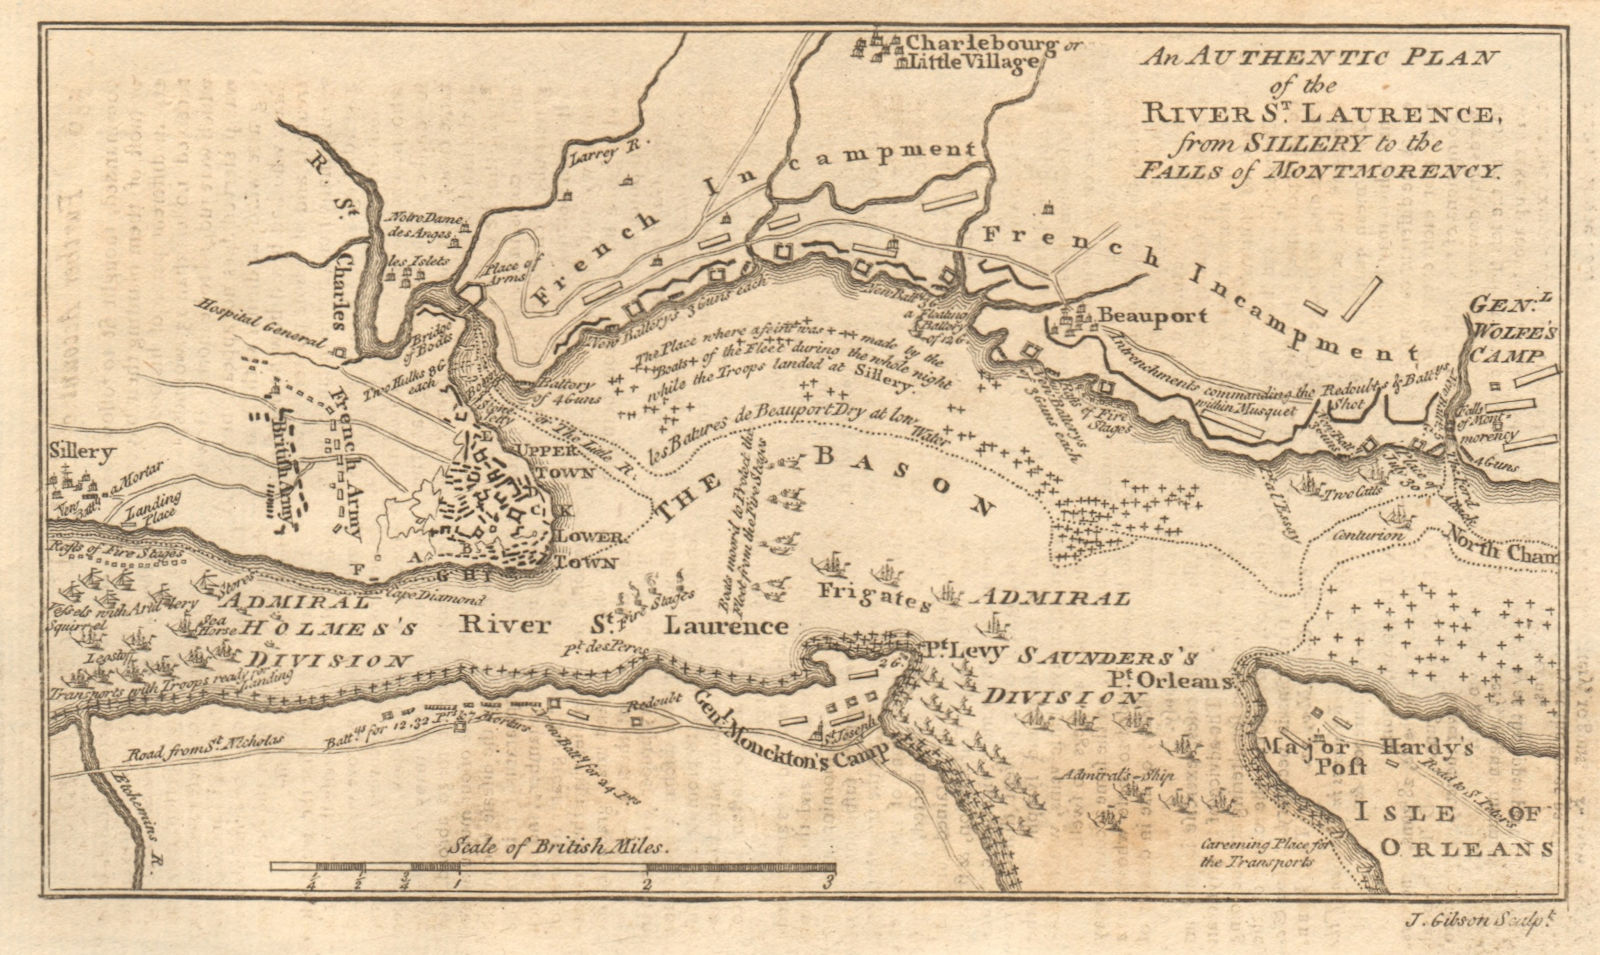 Associate Product An authentic plan of the River St. Laurence… Quebec City. GIBSON 1759 old map